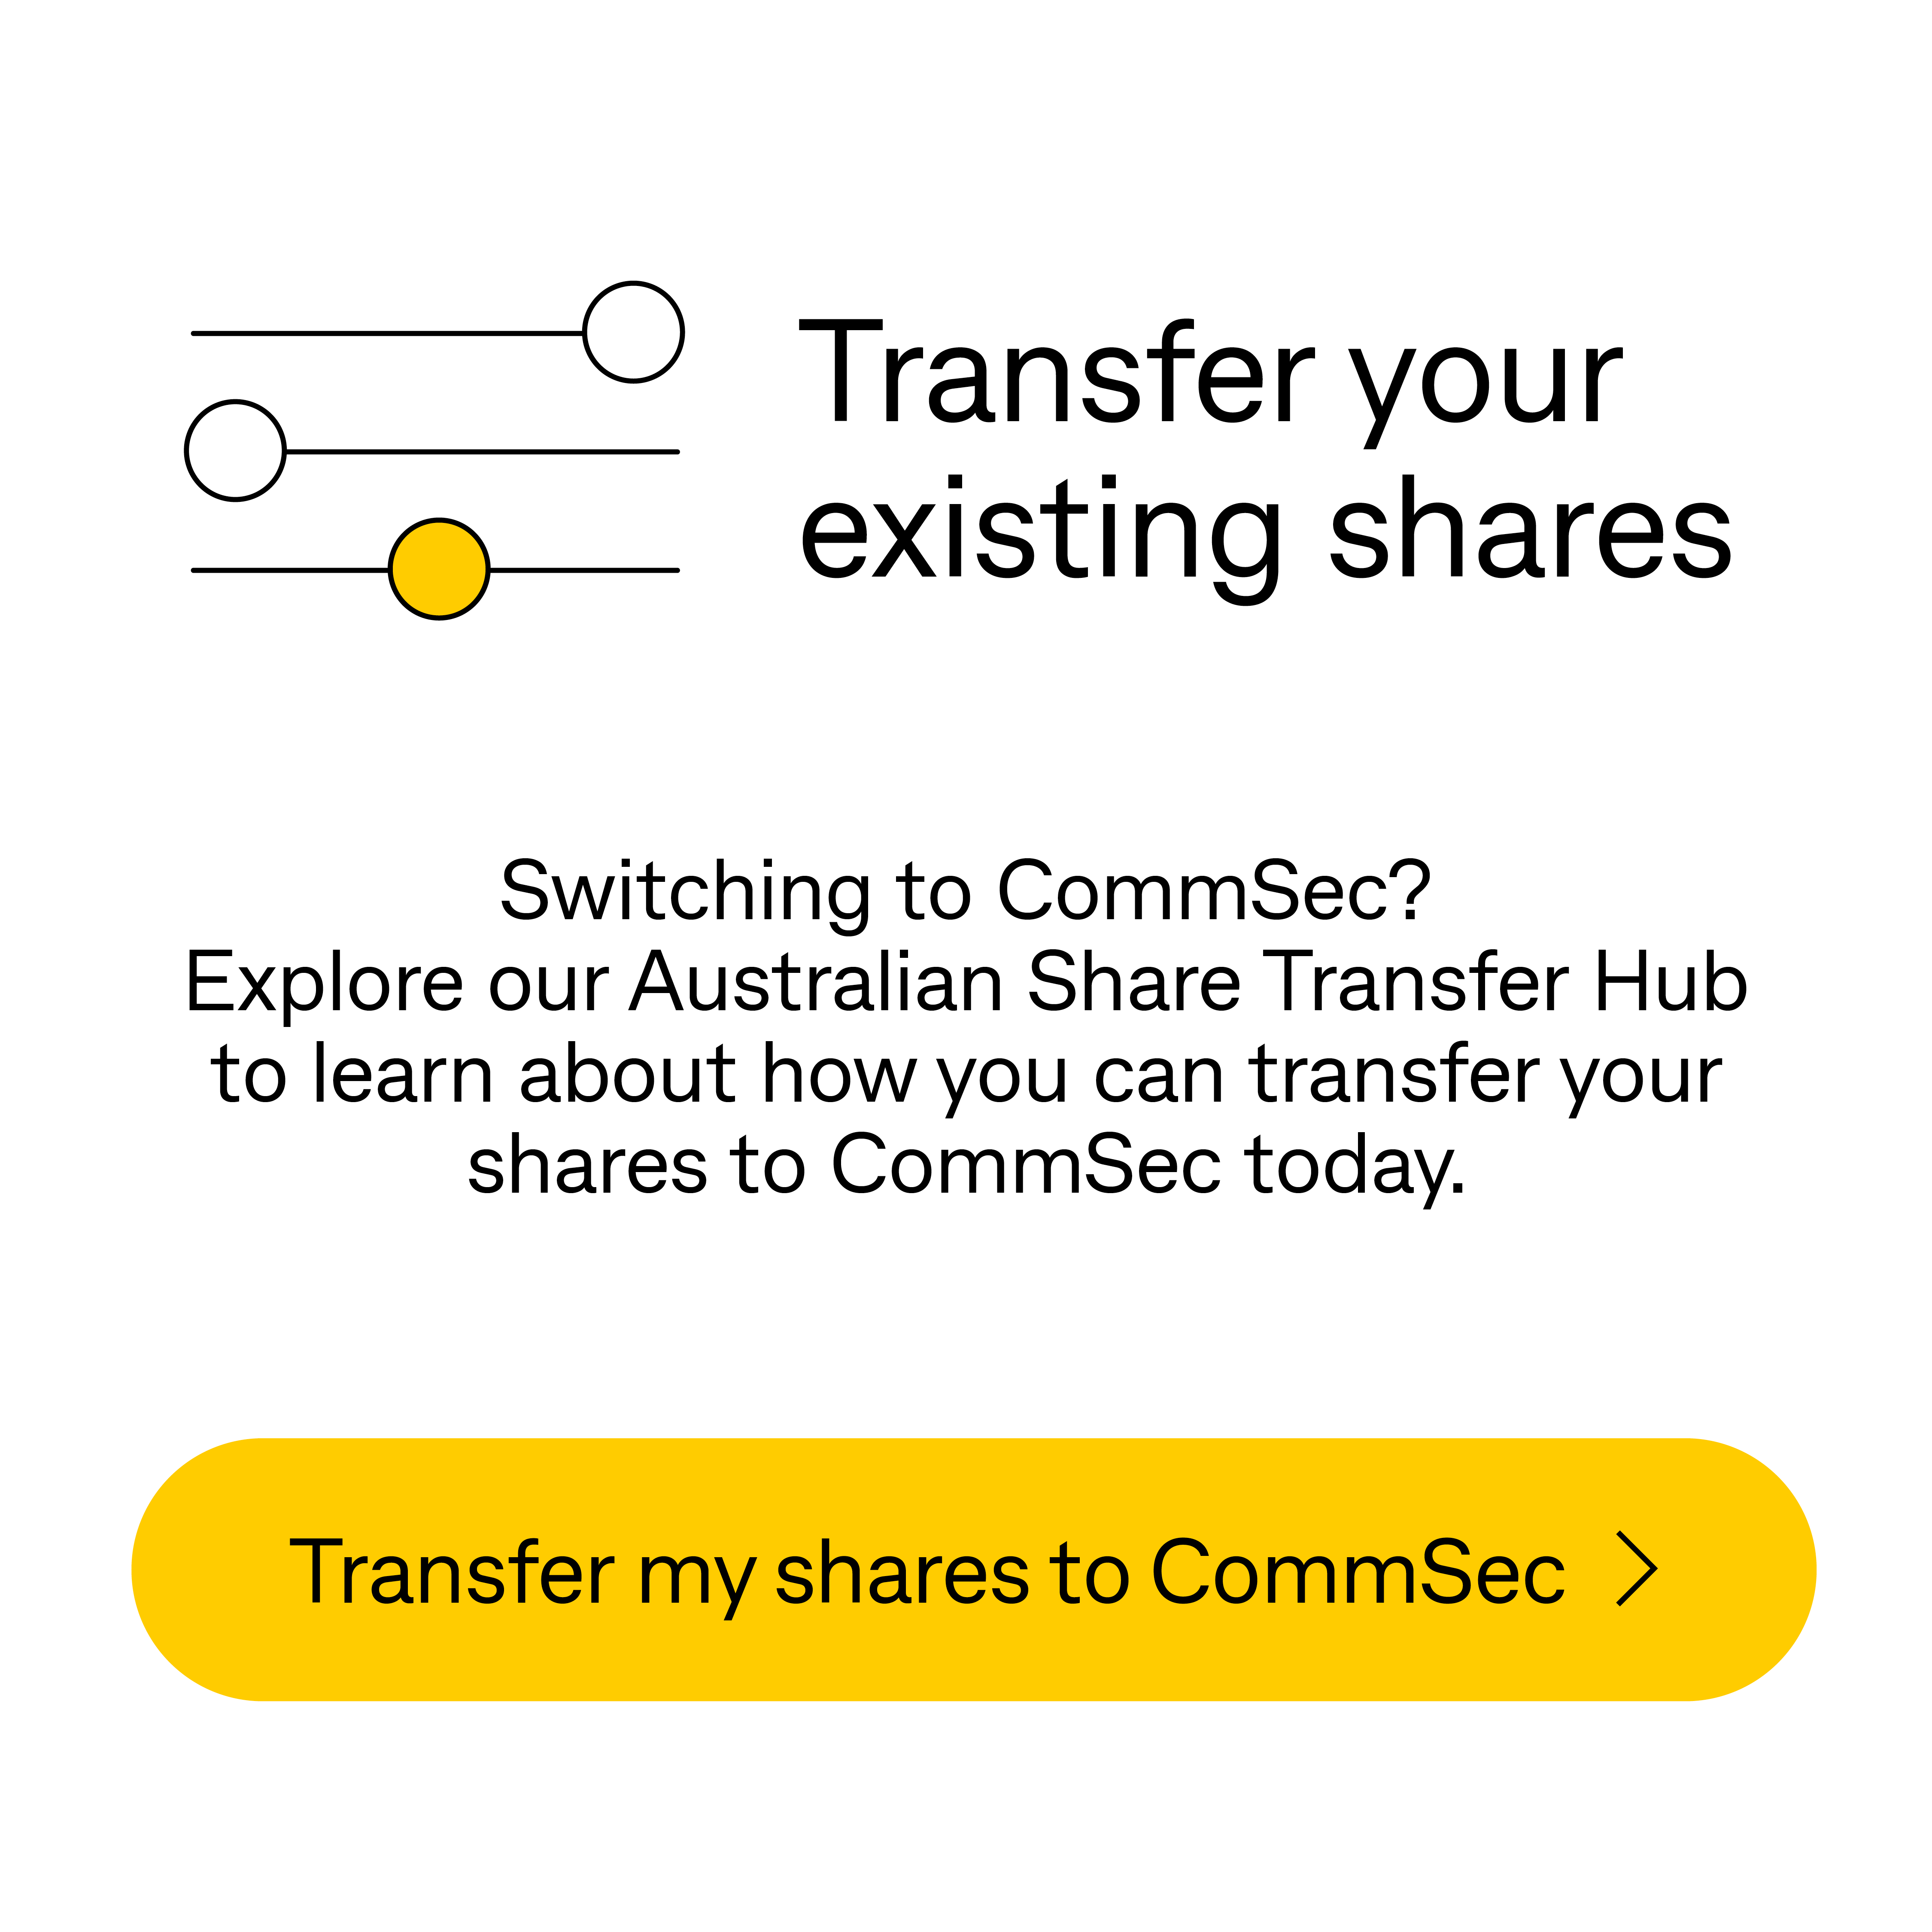 Transfer my shares to CommSec